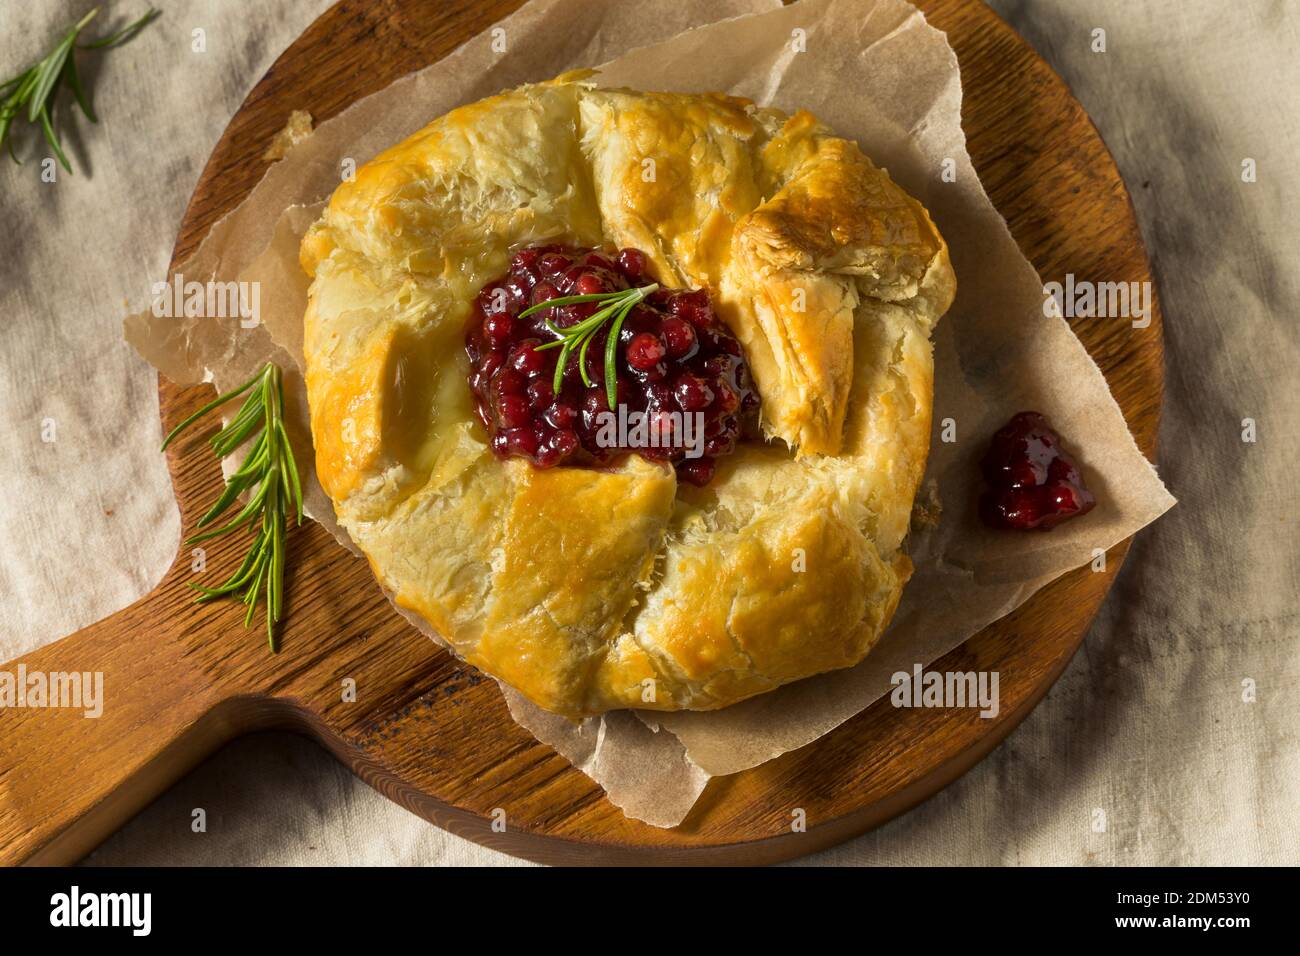 Homemade Baked Brie in Puff Pastry with Lingonberry Stock Photo